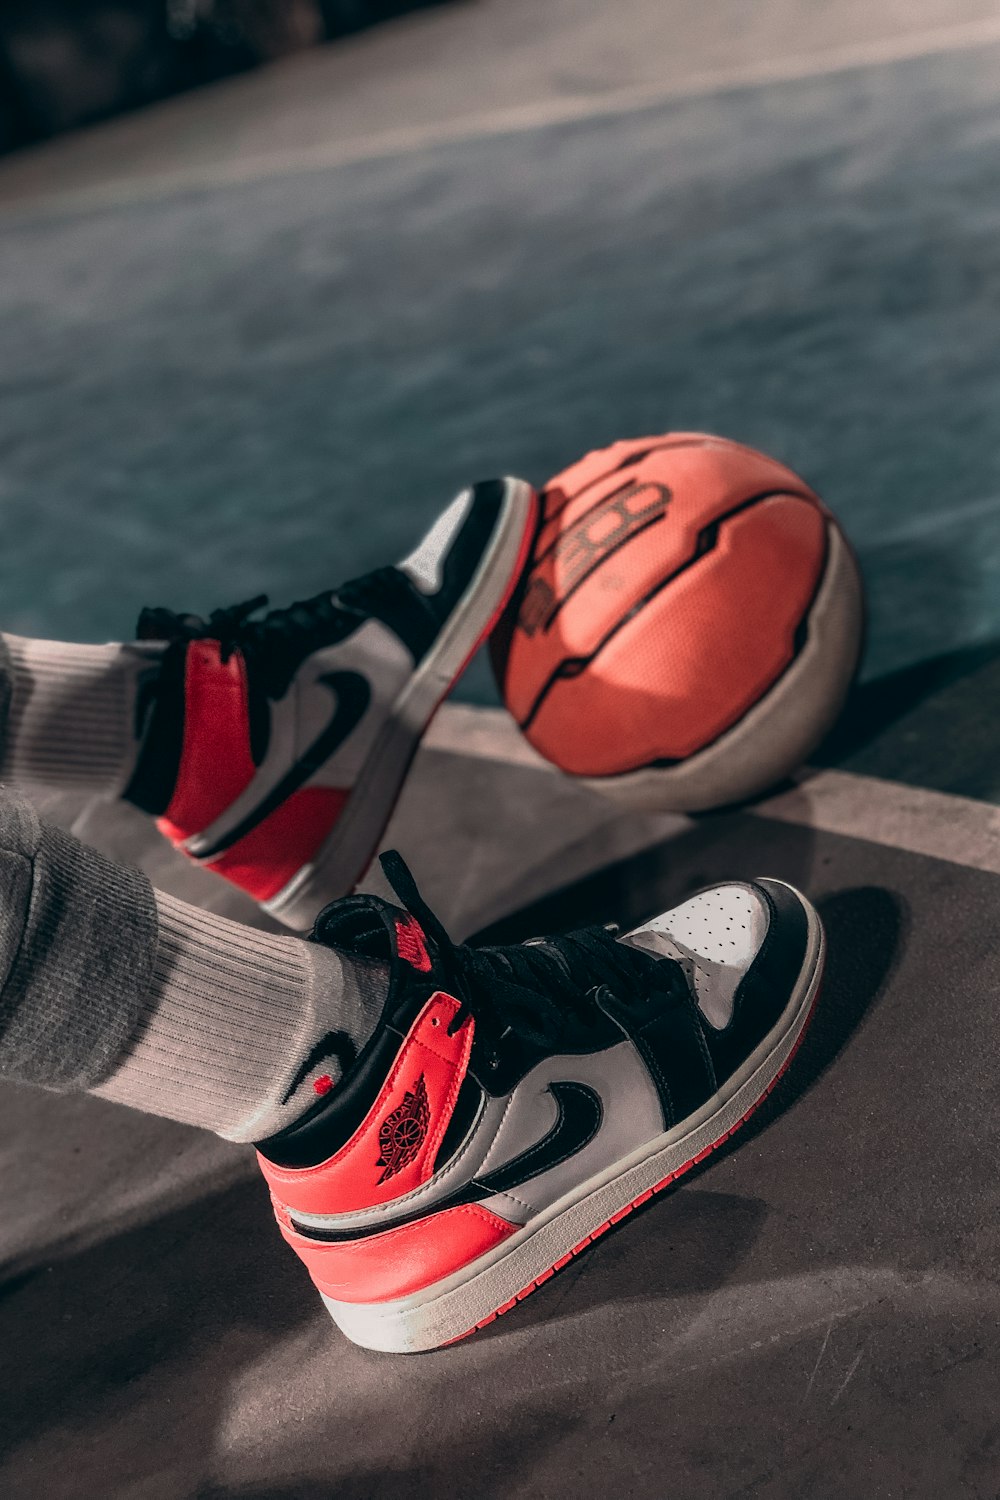 Basketball Shoes Pictures | Download Free Images on Unsplash